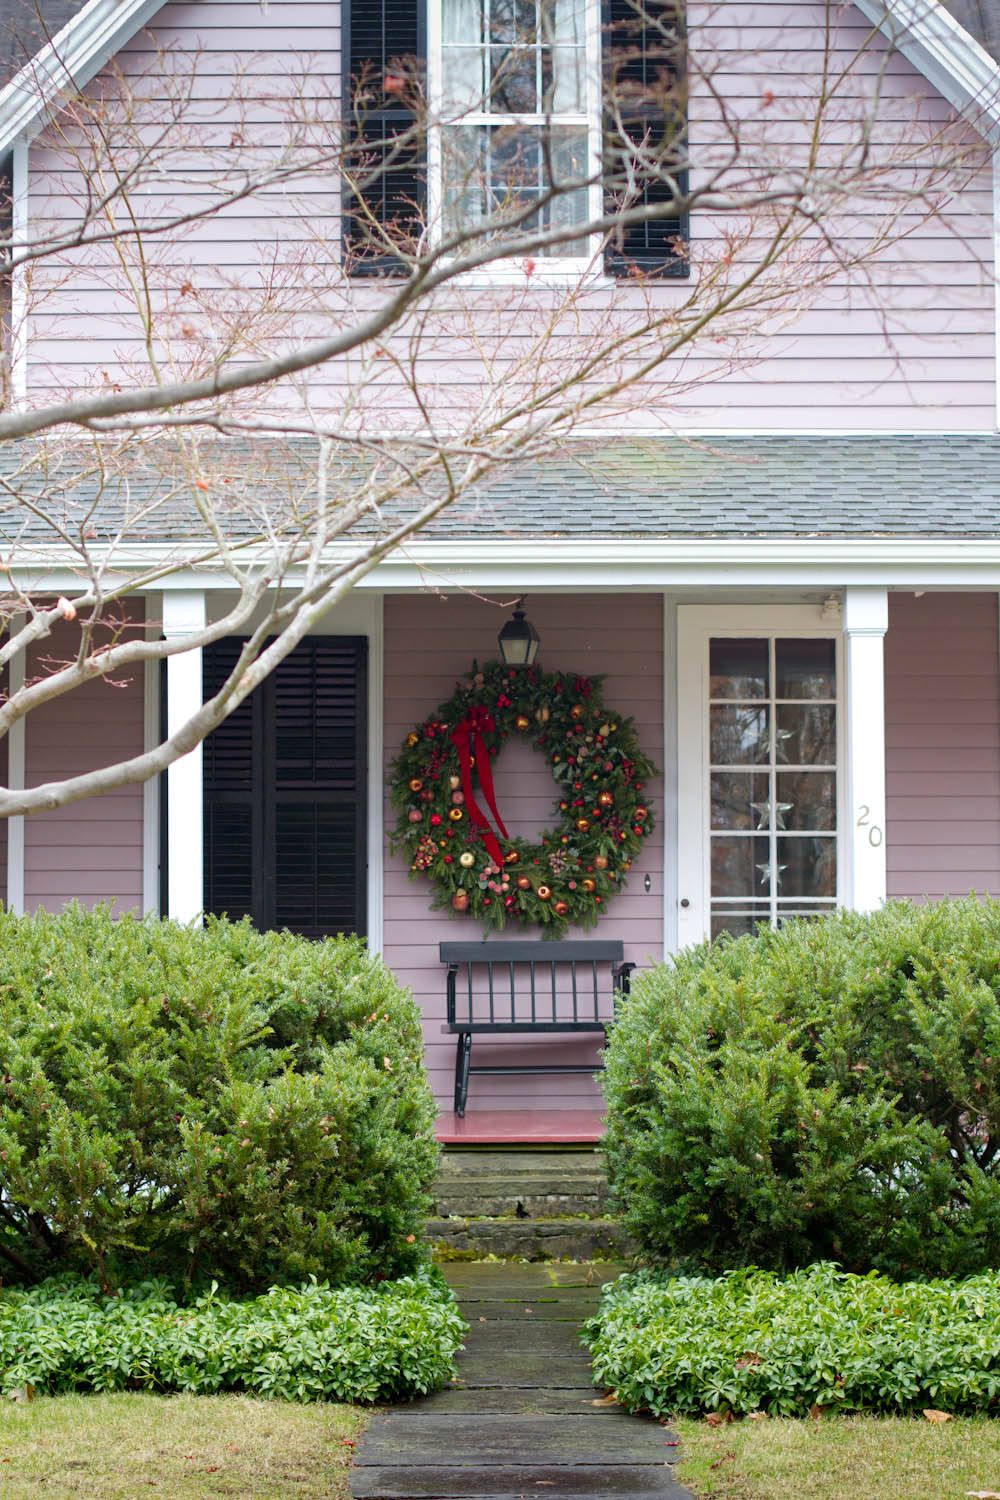 t5-5 Awesome Christmas yard decorations you can try